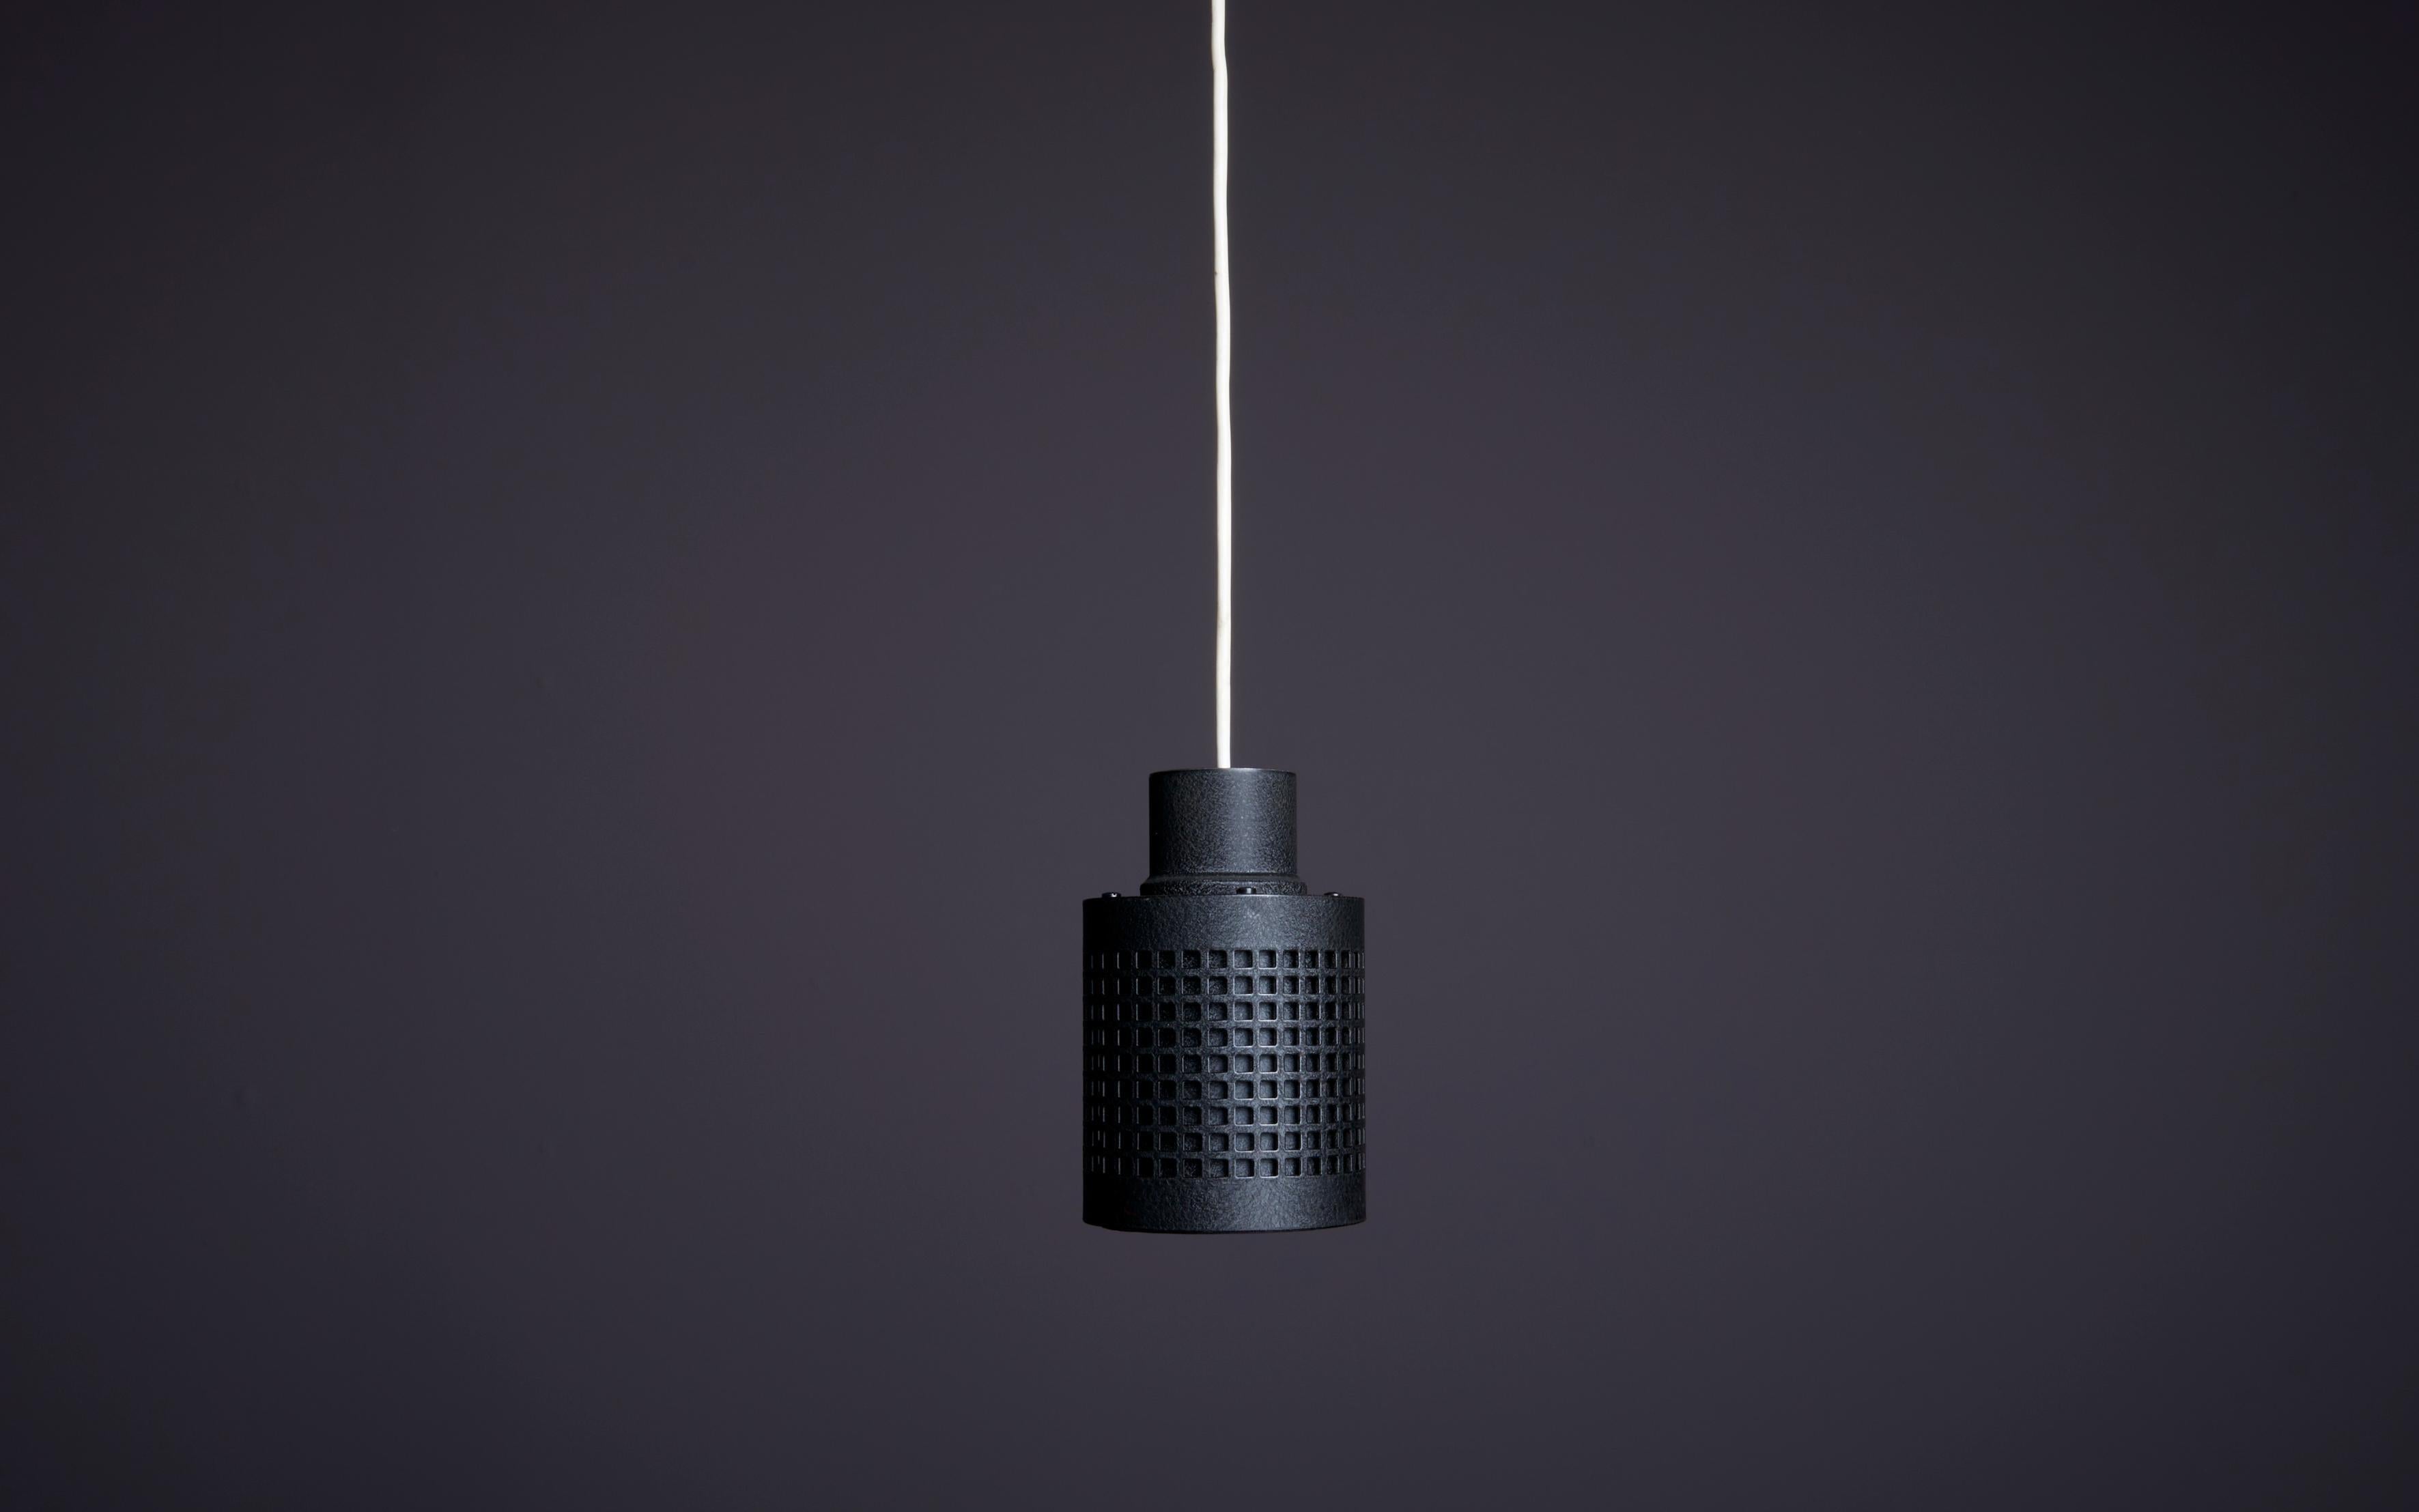 Pendant lamp by German manufacturer Leitz in black lacquered aluminum. Socket: 1 x E27. Please note: Lamp should be fitted professionally in accordance to local requirements.